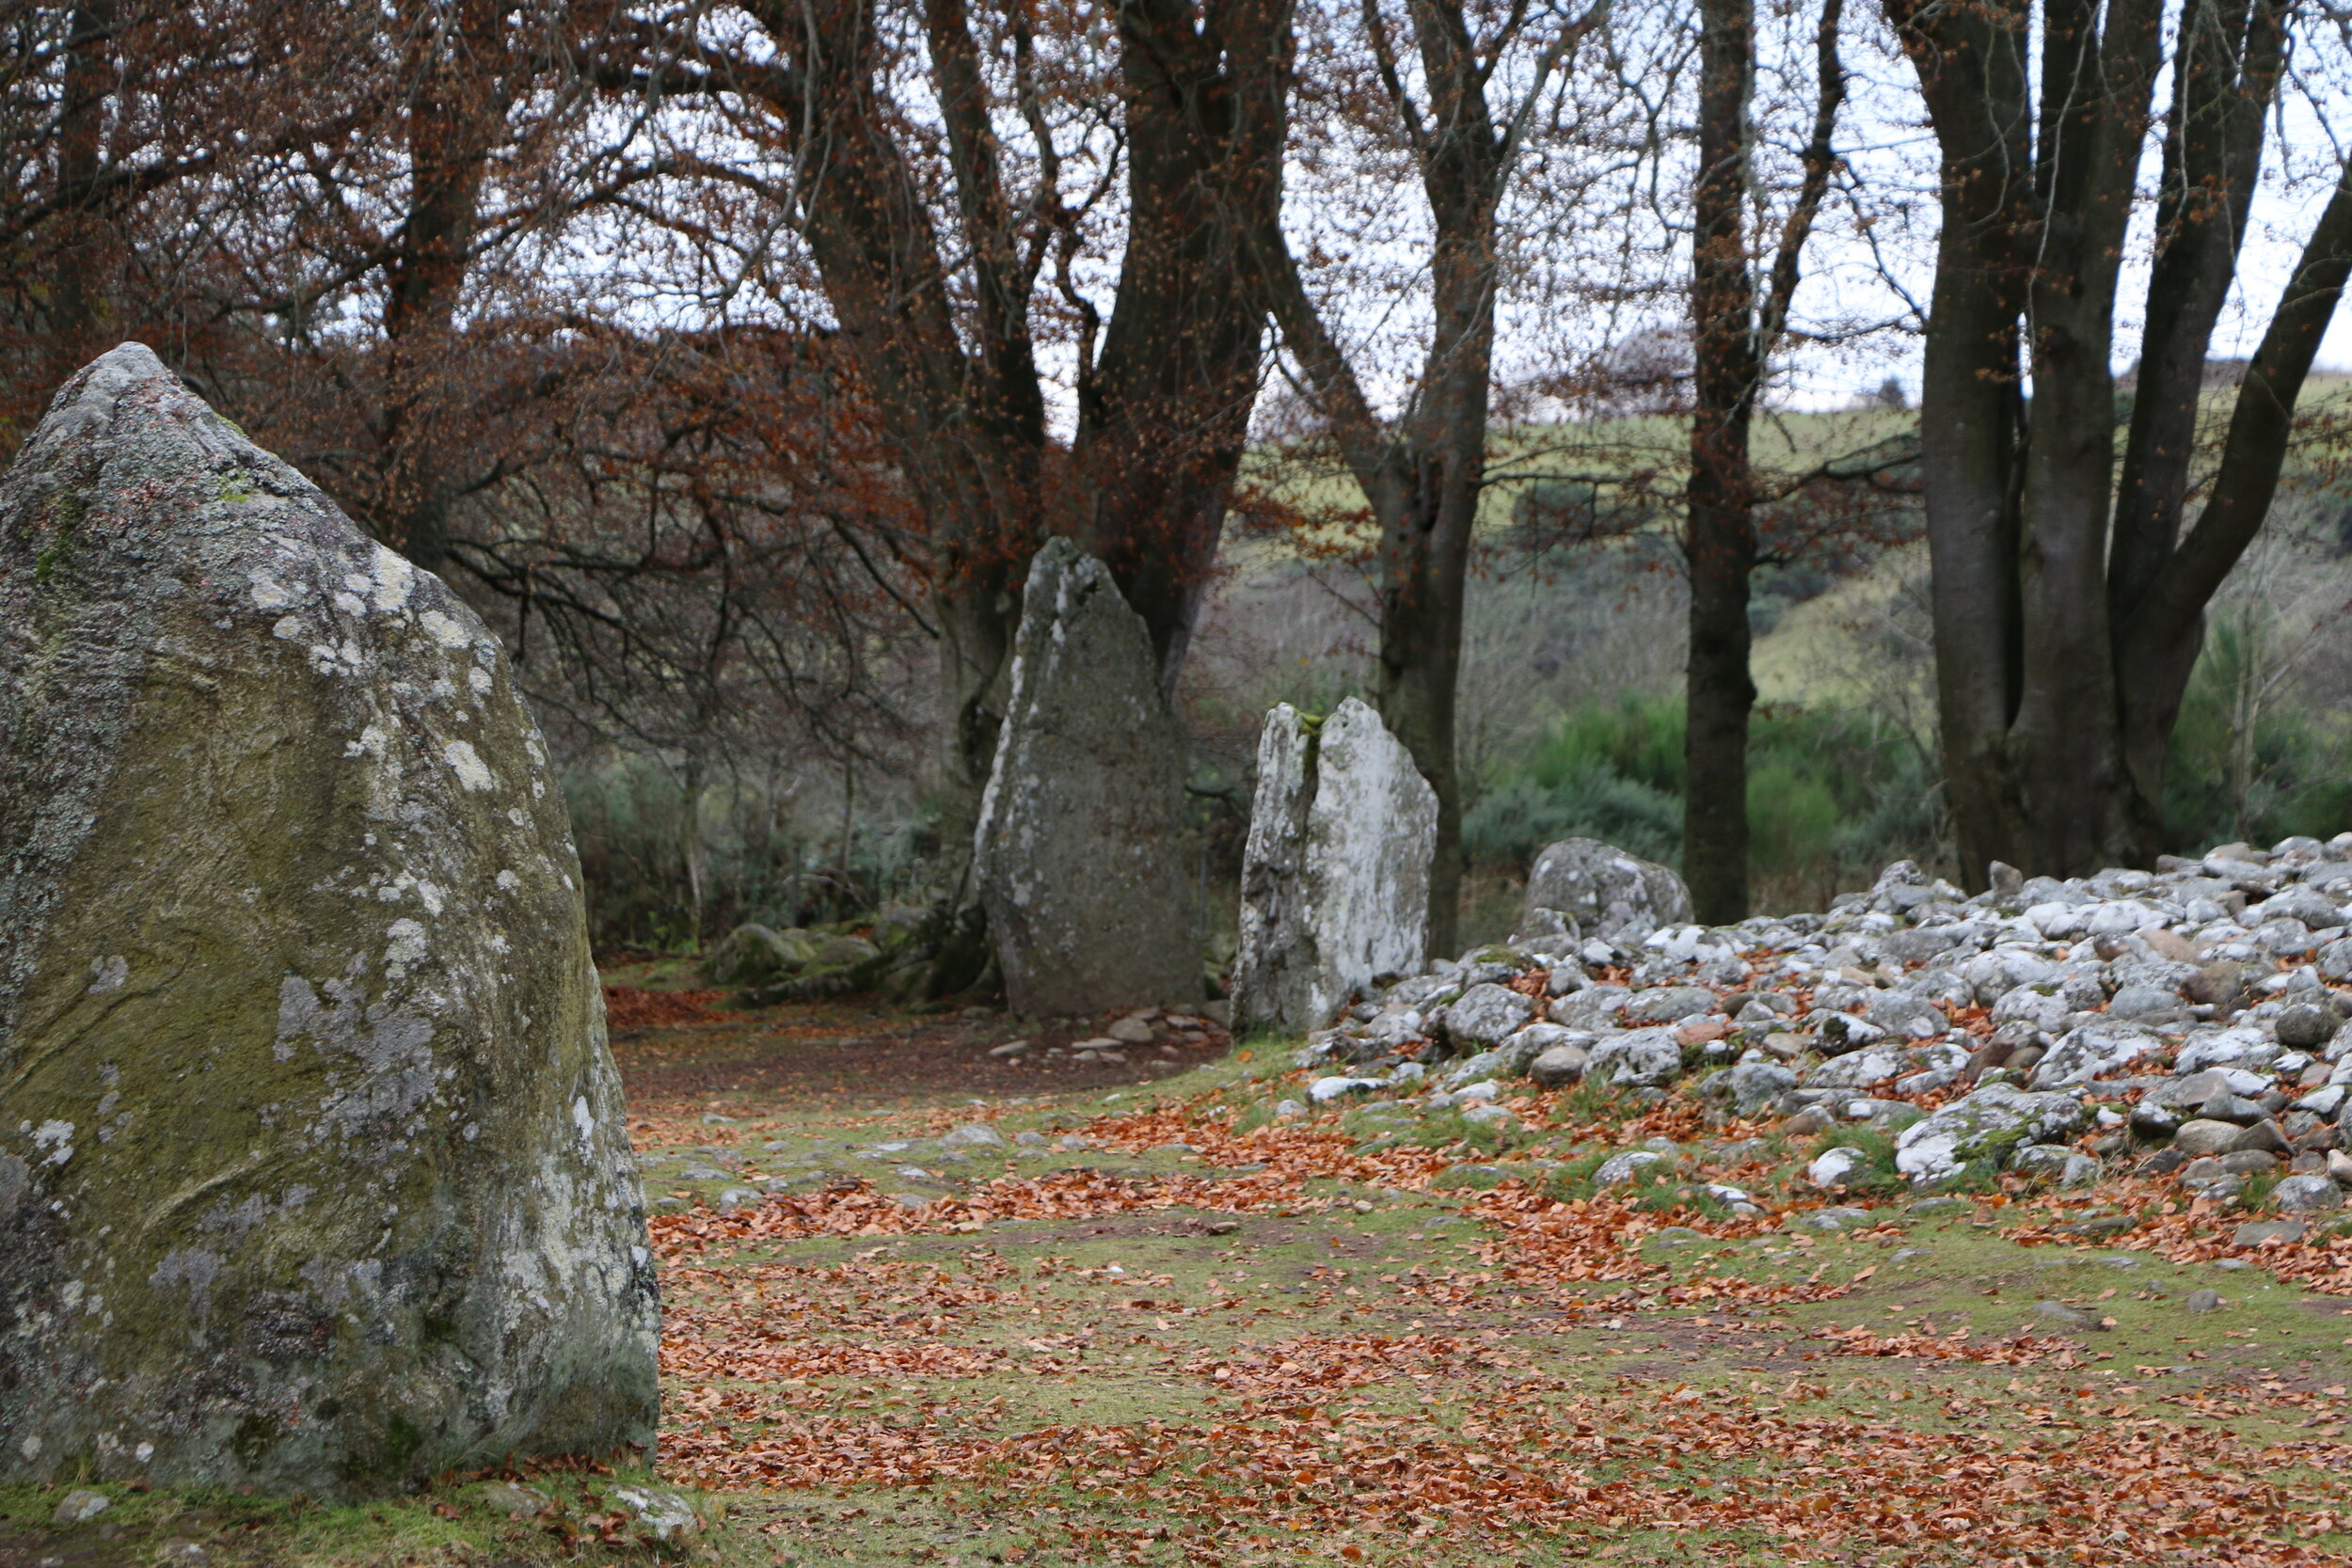 The Clava Cairns by Culloden Moor. Inverness, Scotland.